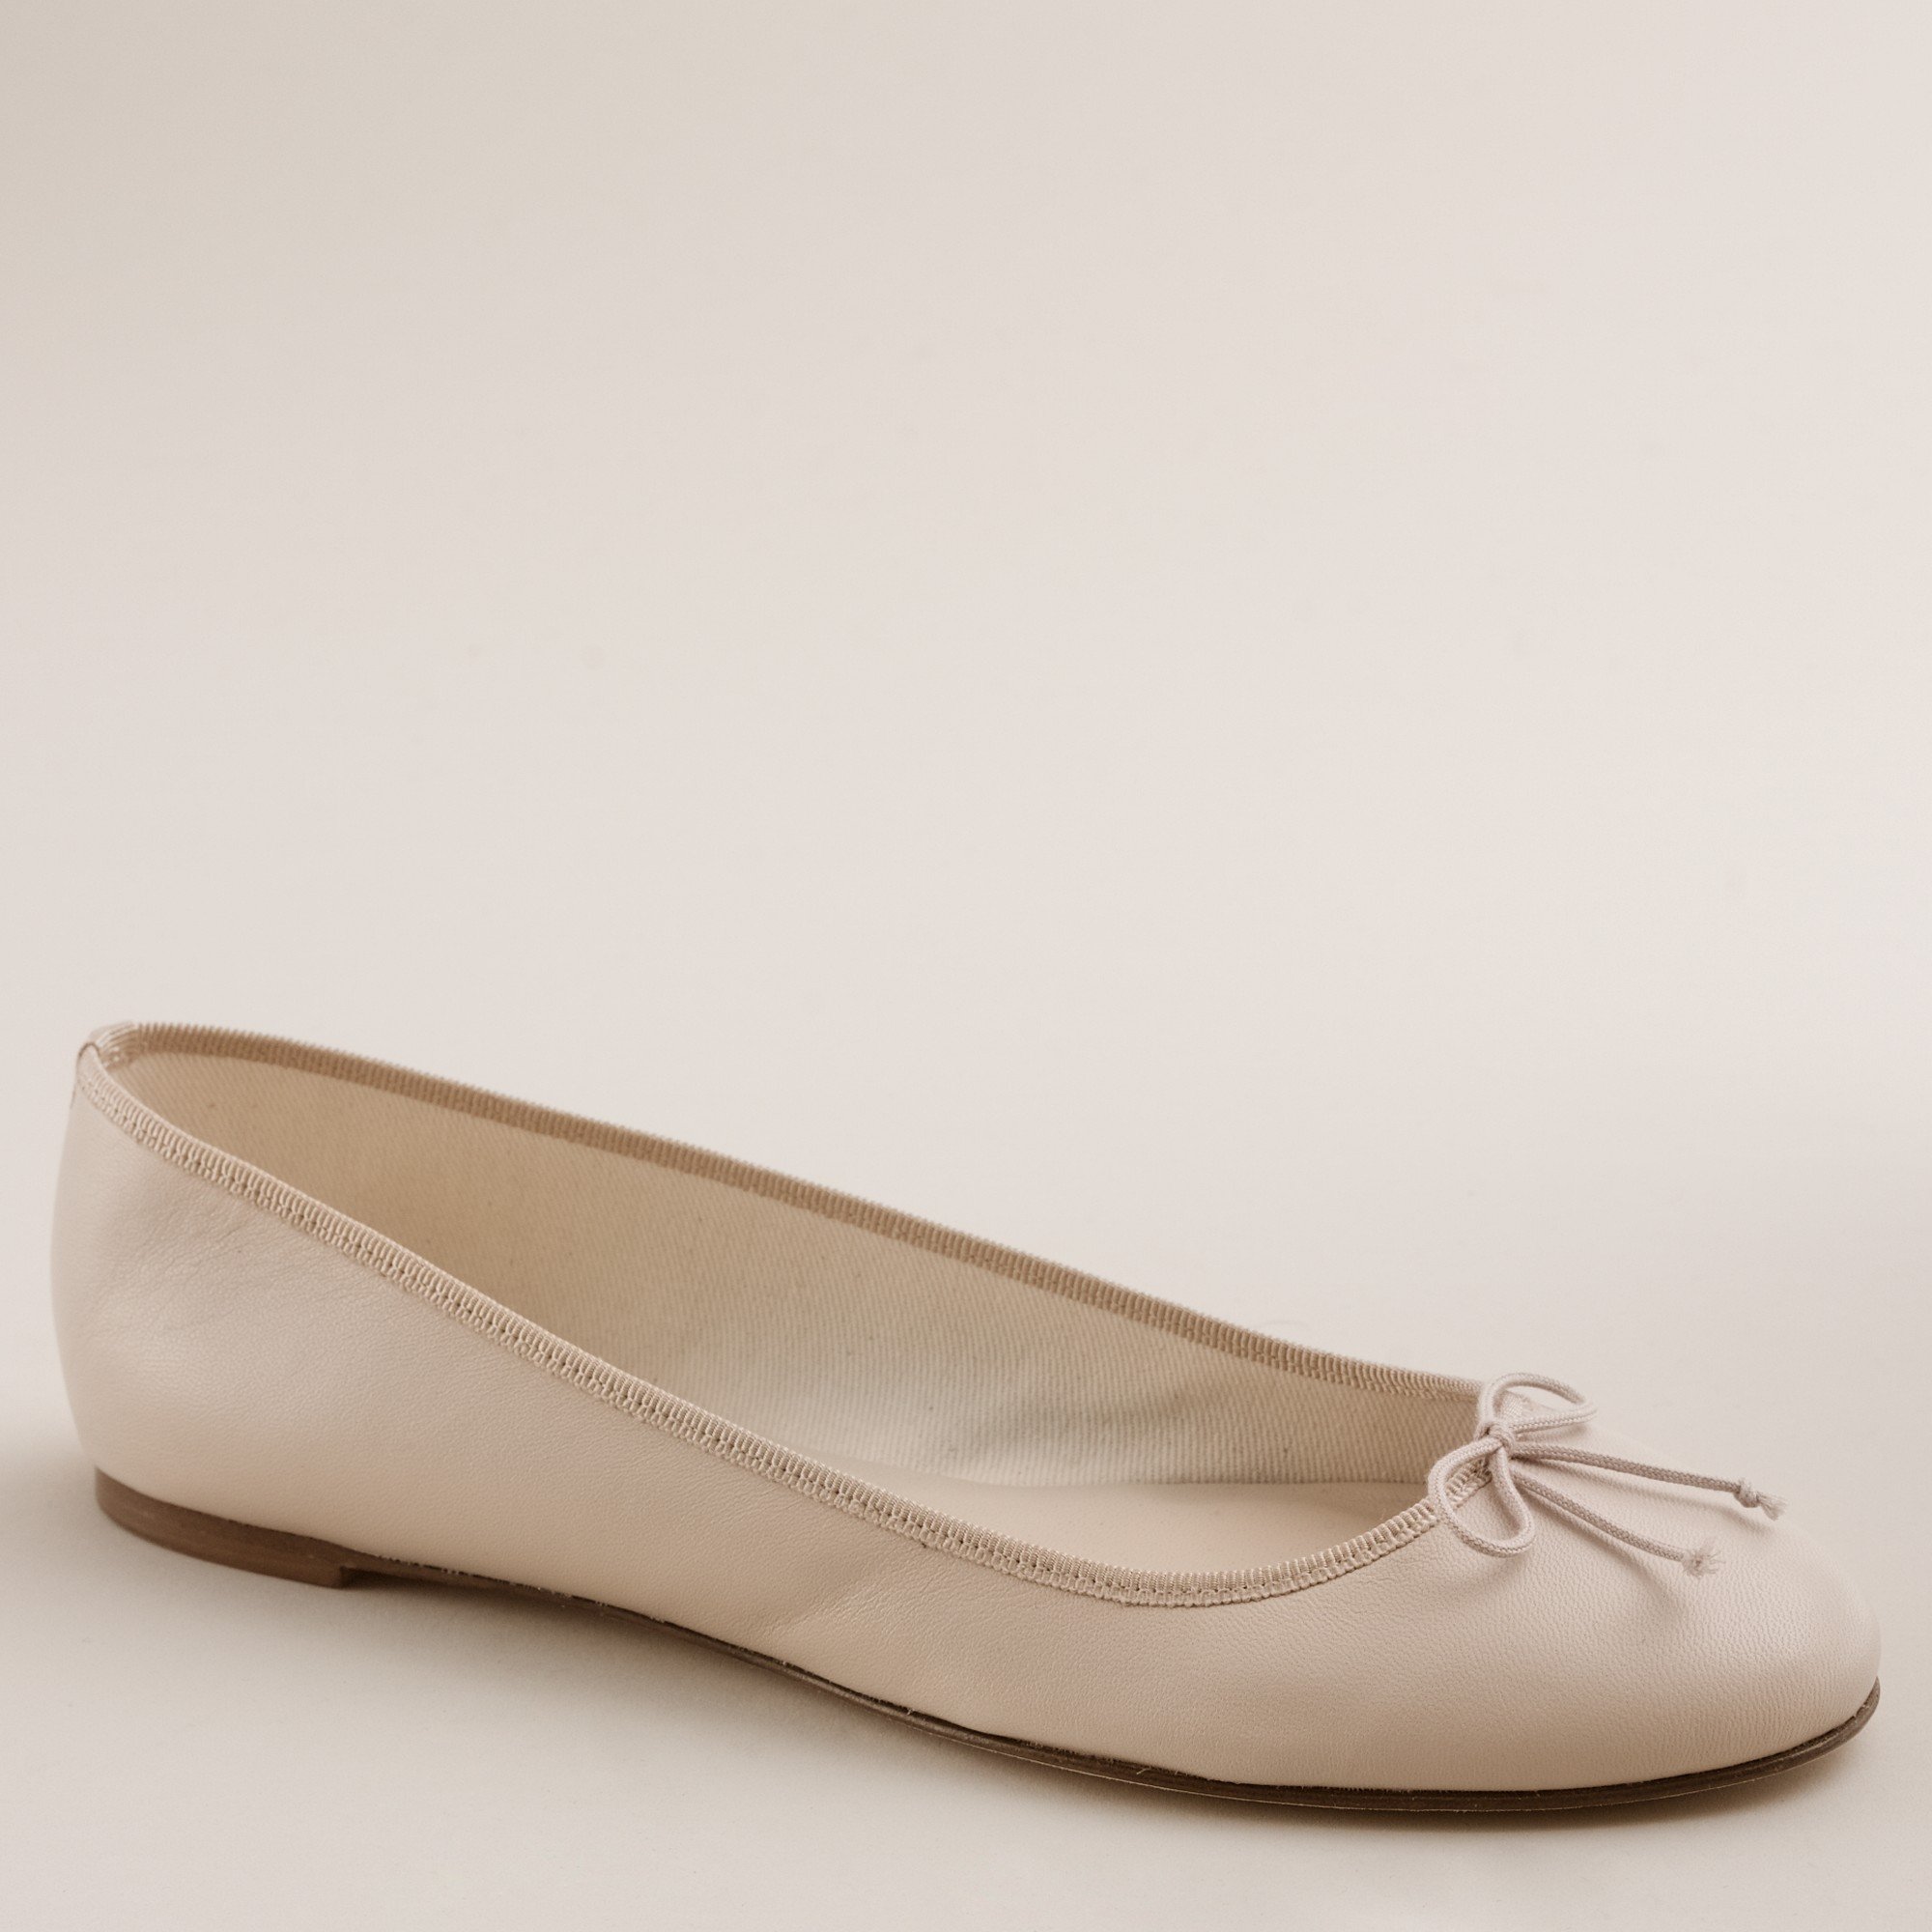 J.crew Classic Leather Ballet Flats in Natural Lyst